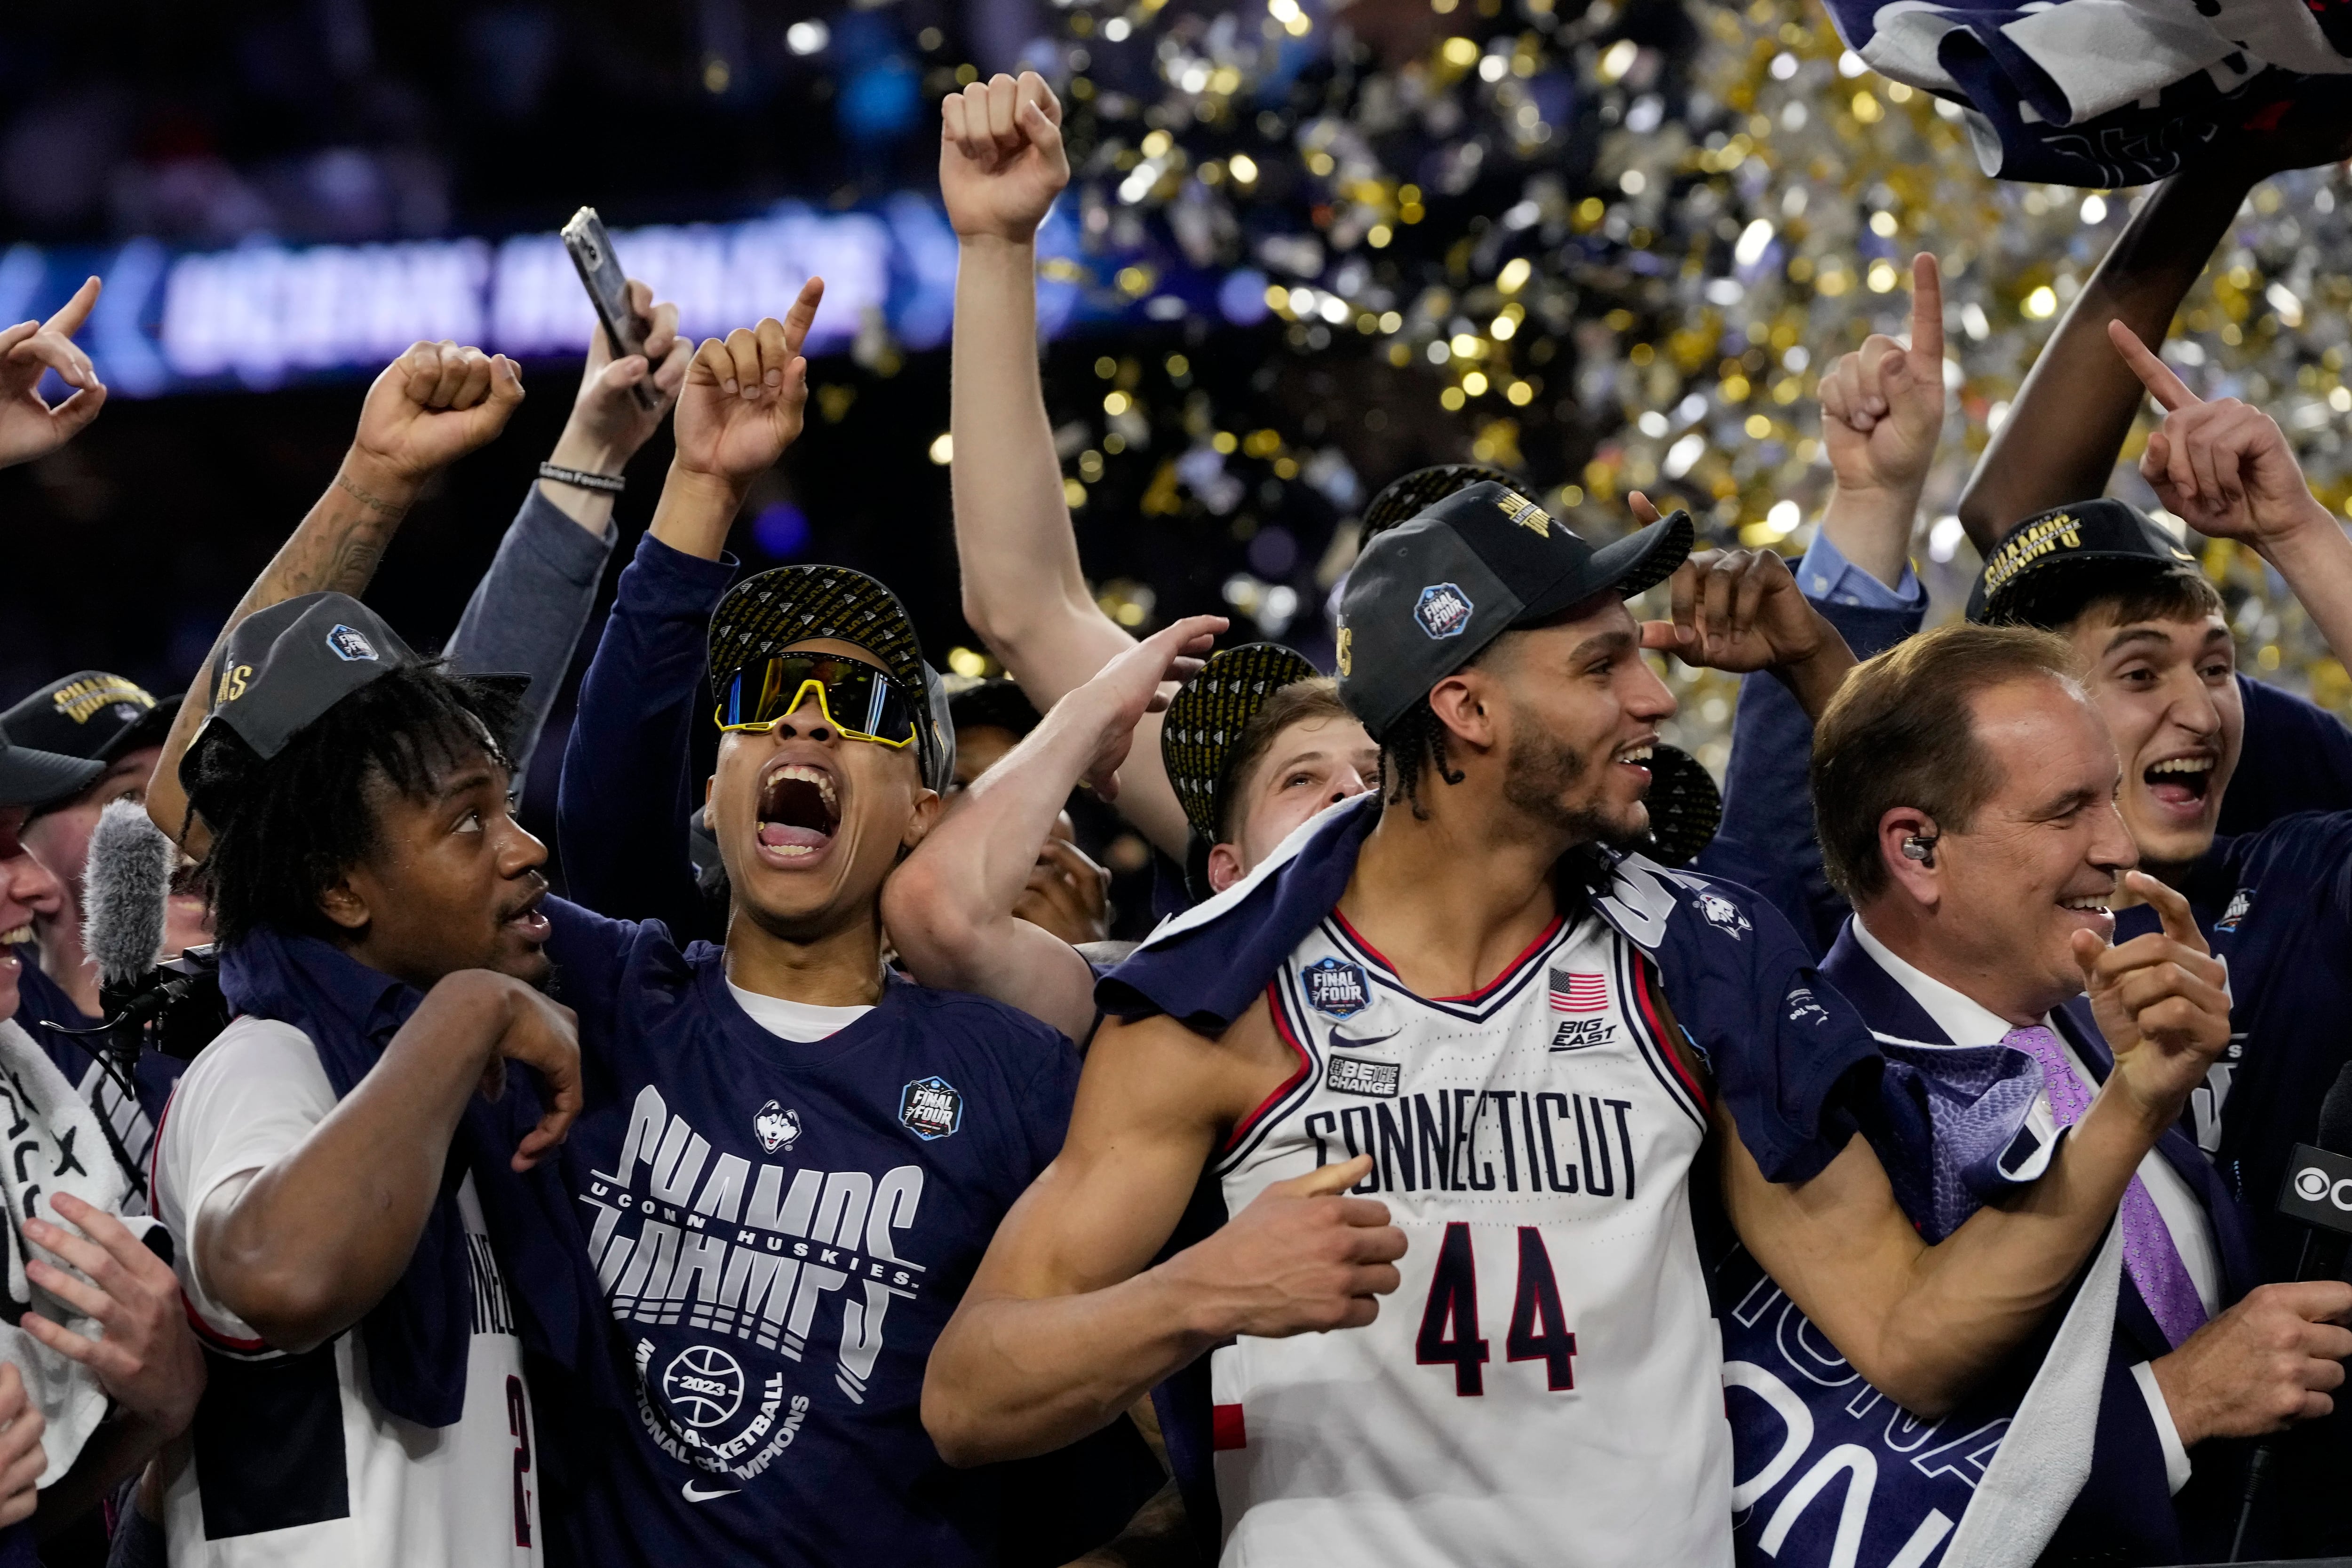 Reigning national champion UConn has the talent to go back-to-back.